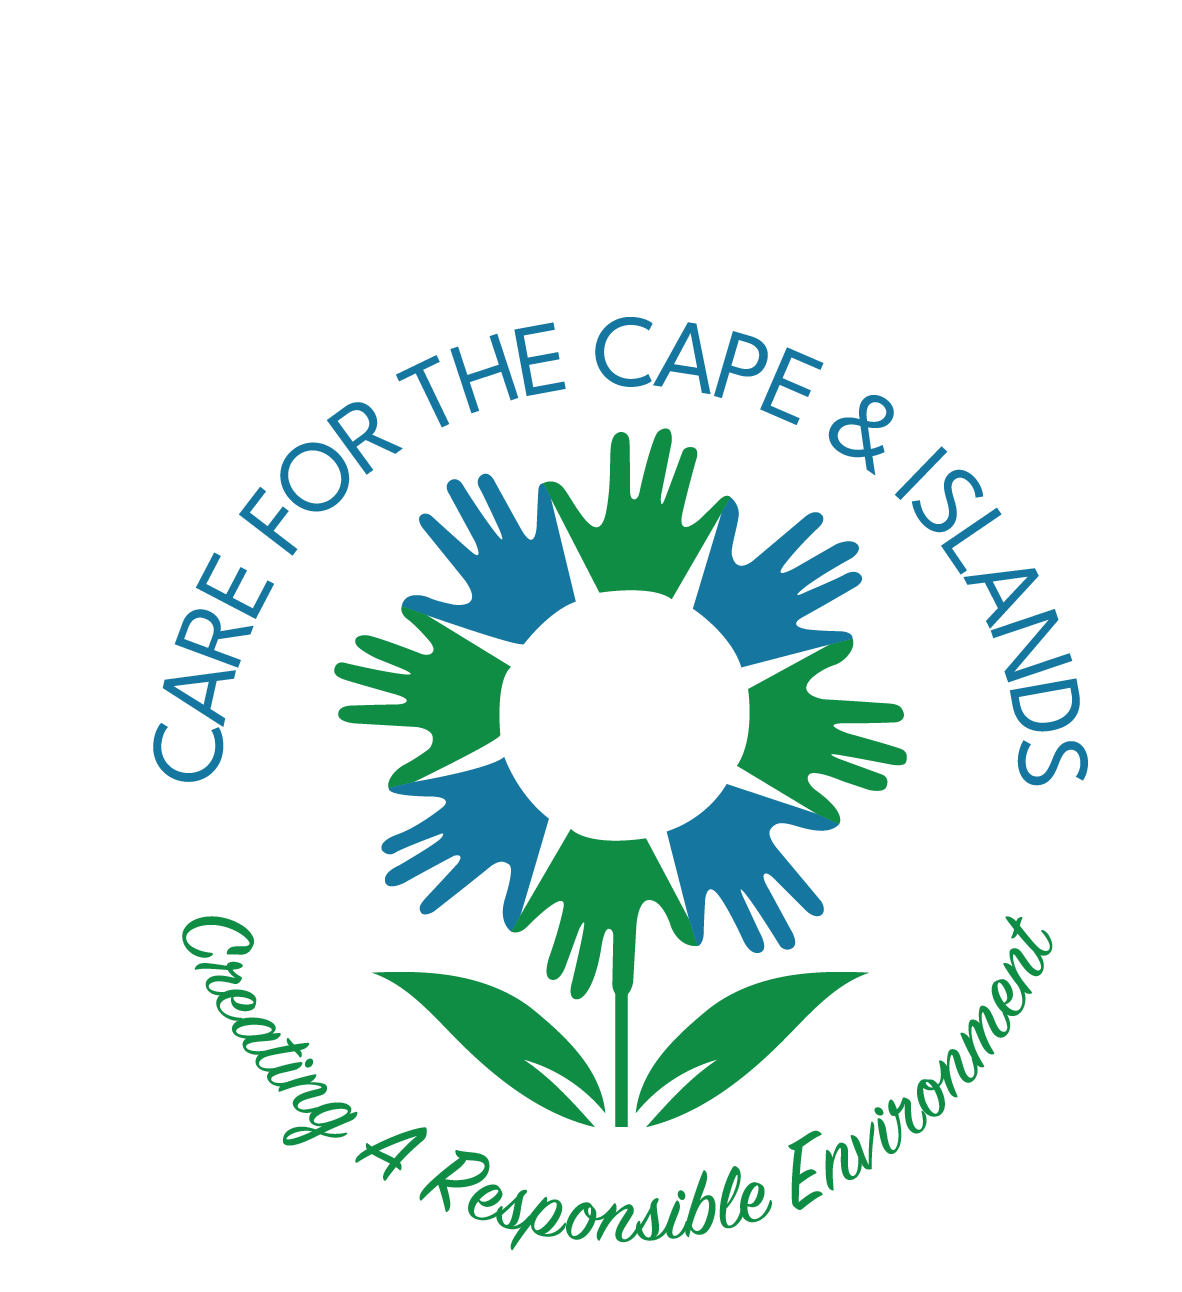 CARE for the Cape and Islands